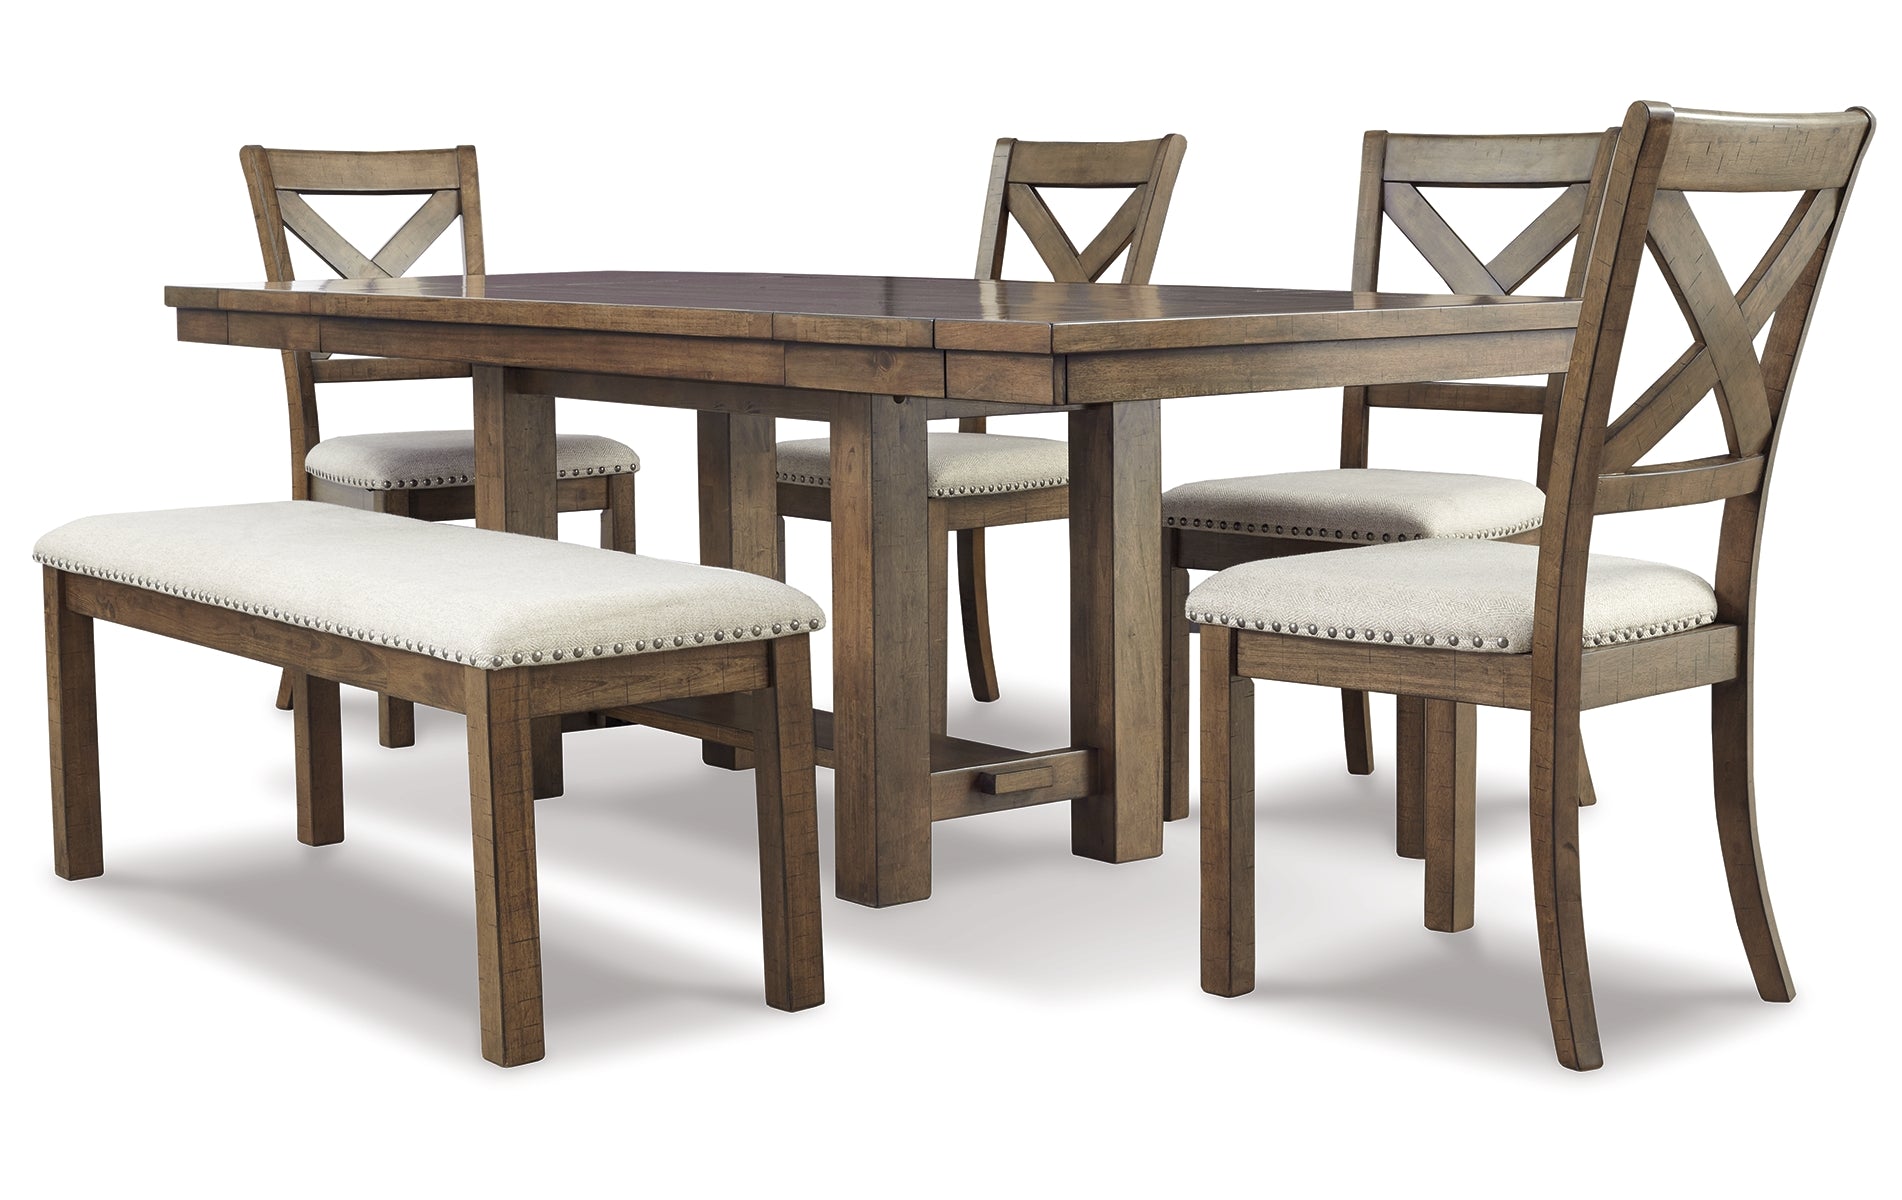 Moriville Dining Table and 4 Chairs and Bench